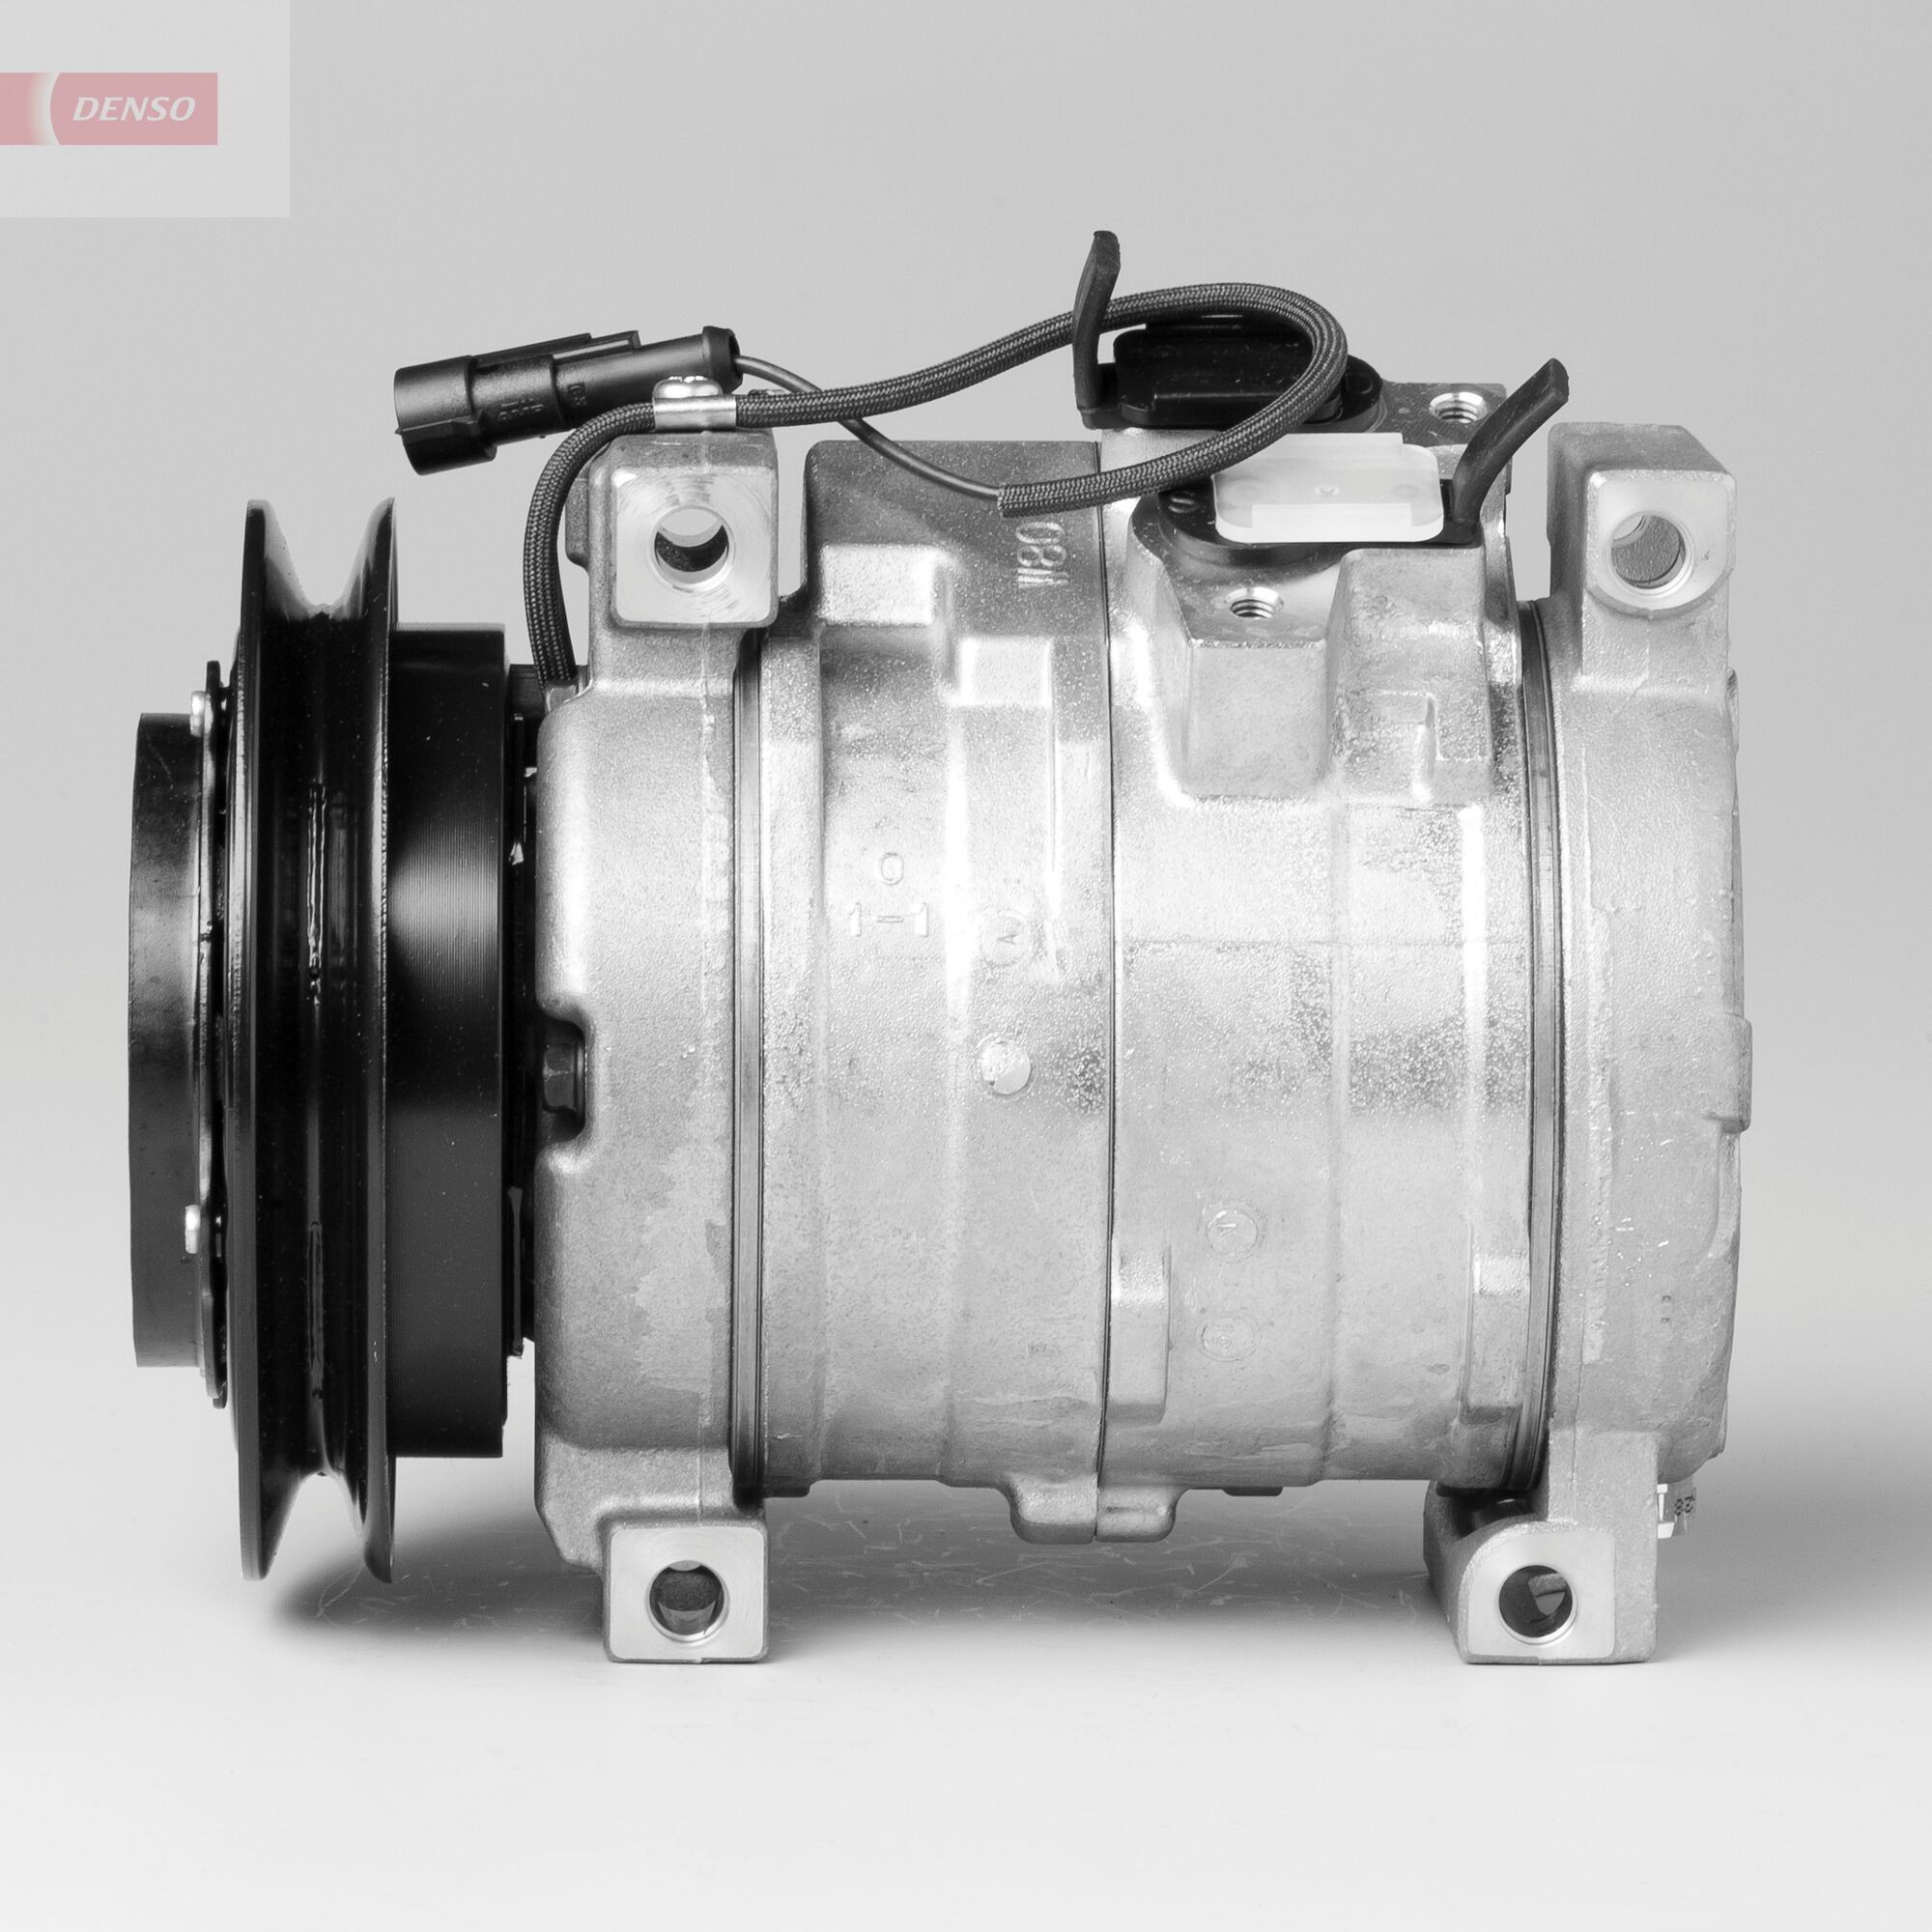 DENSO 10S15C, 12V, PAG 46, R 134a, with magnetic clutch Number of grooves: 1 AC compressor DCP99518 buy